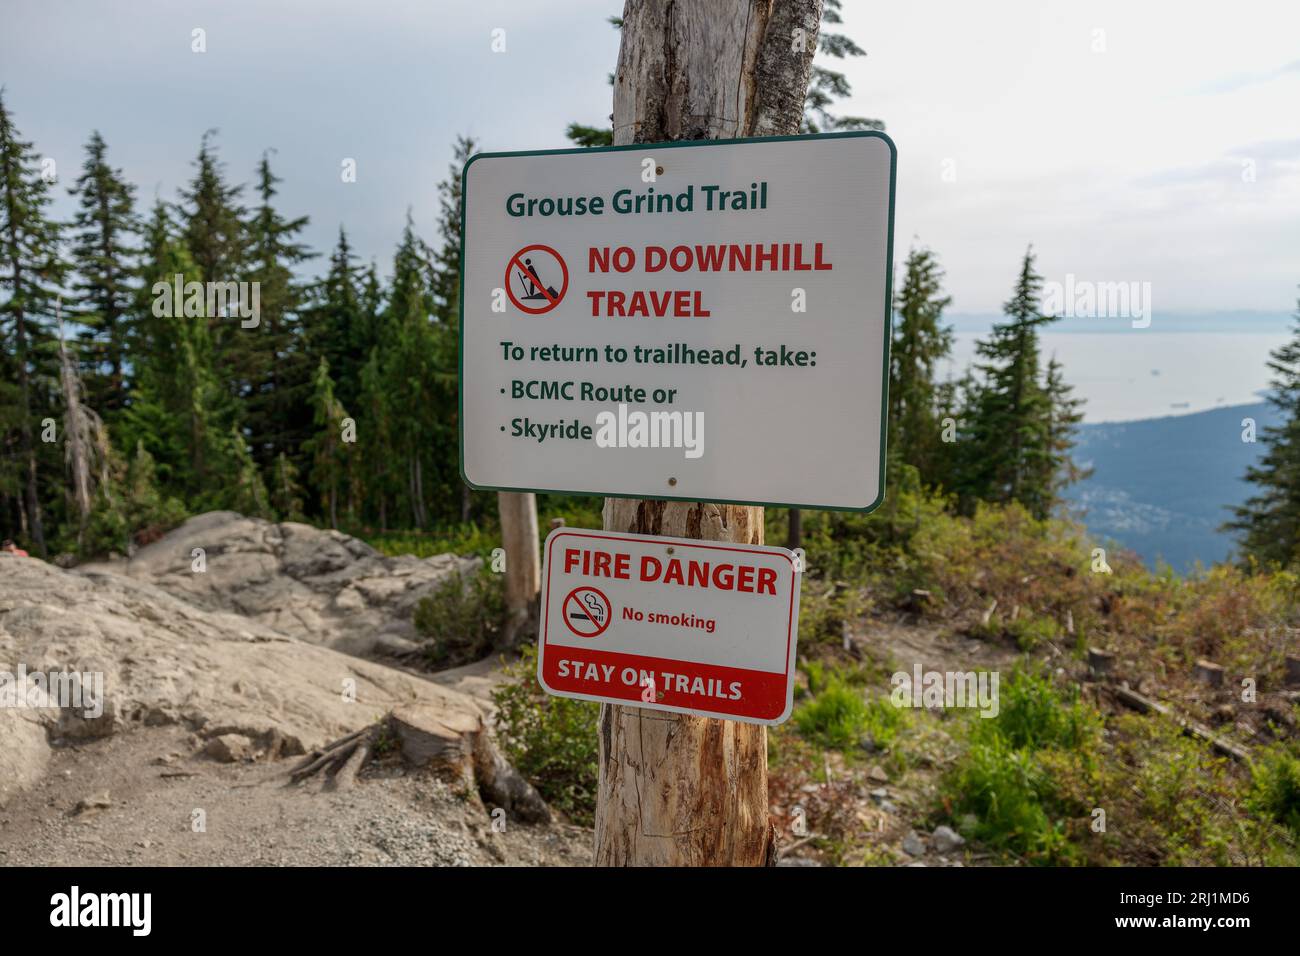 View of a warning sign along the Grouse Grind Trail in Vancouver indicating that downhill travel is prohibited Stock Photo